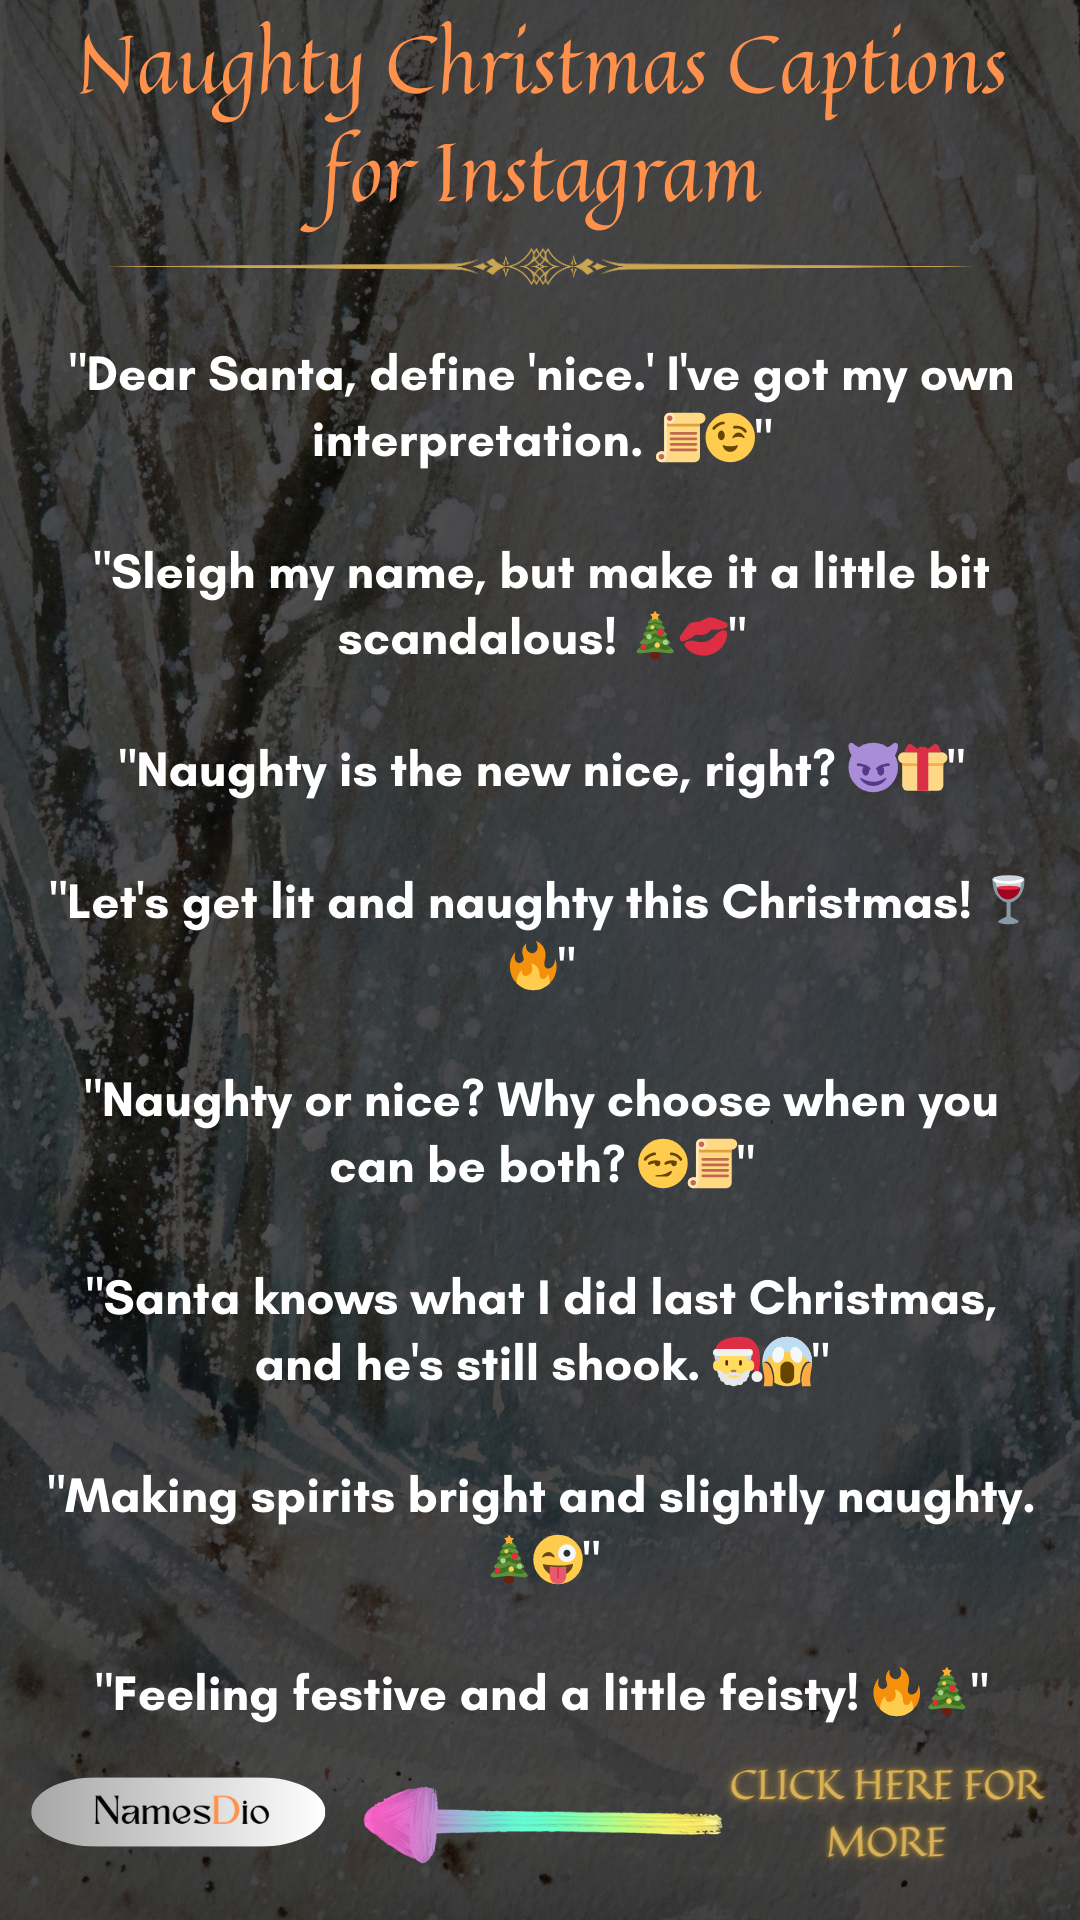 Naughty-Christmas-Captions-for-Instagram